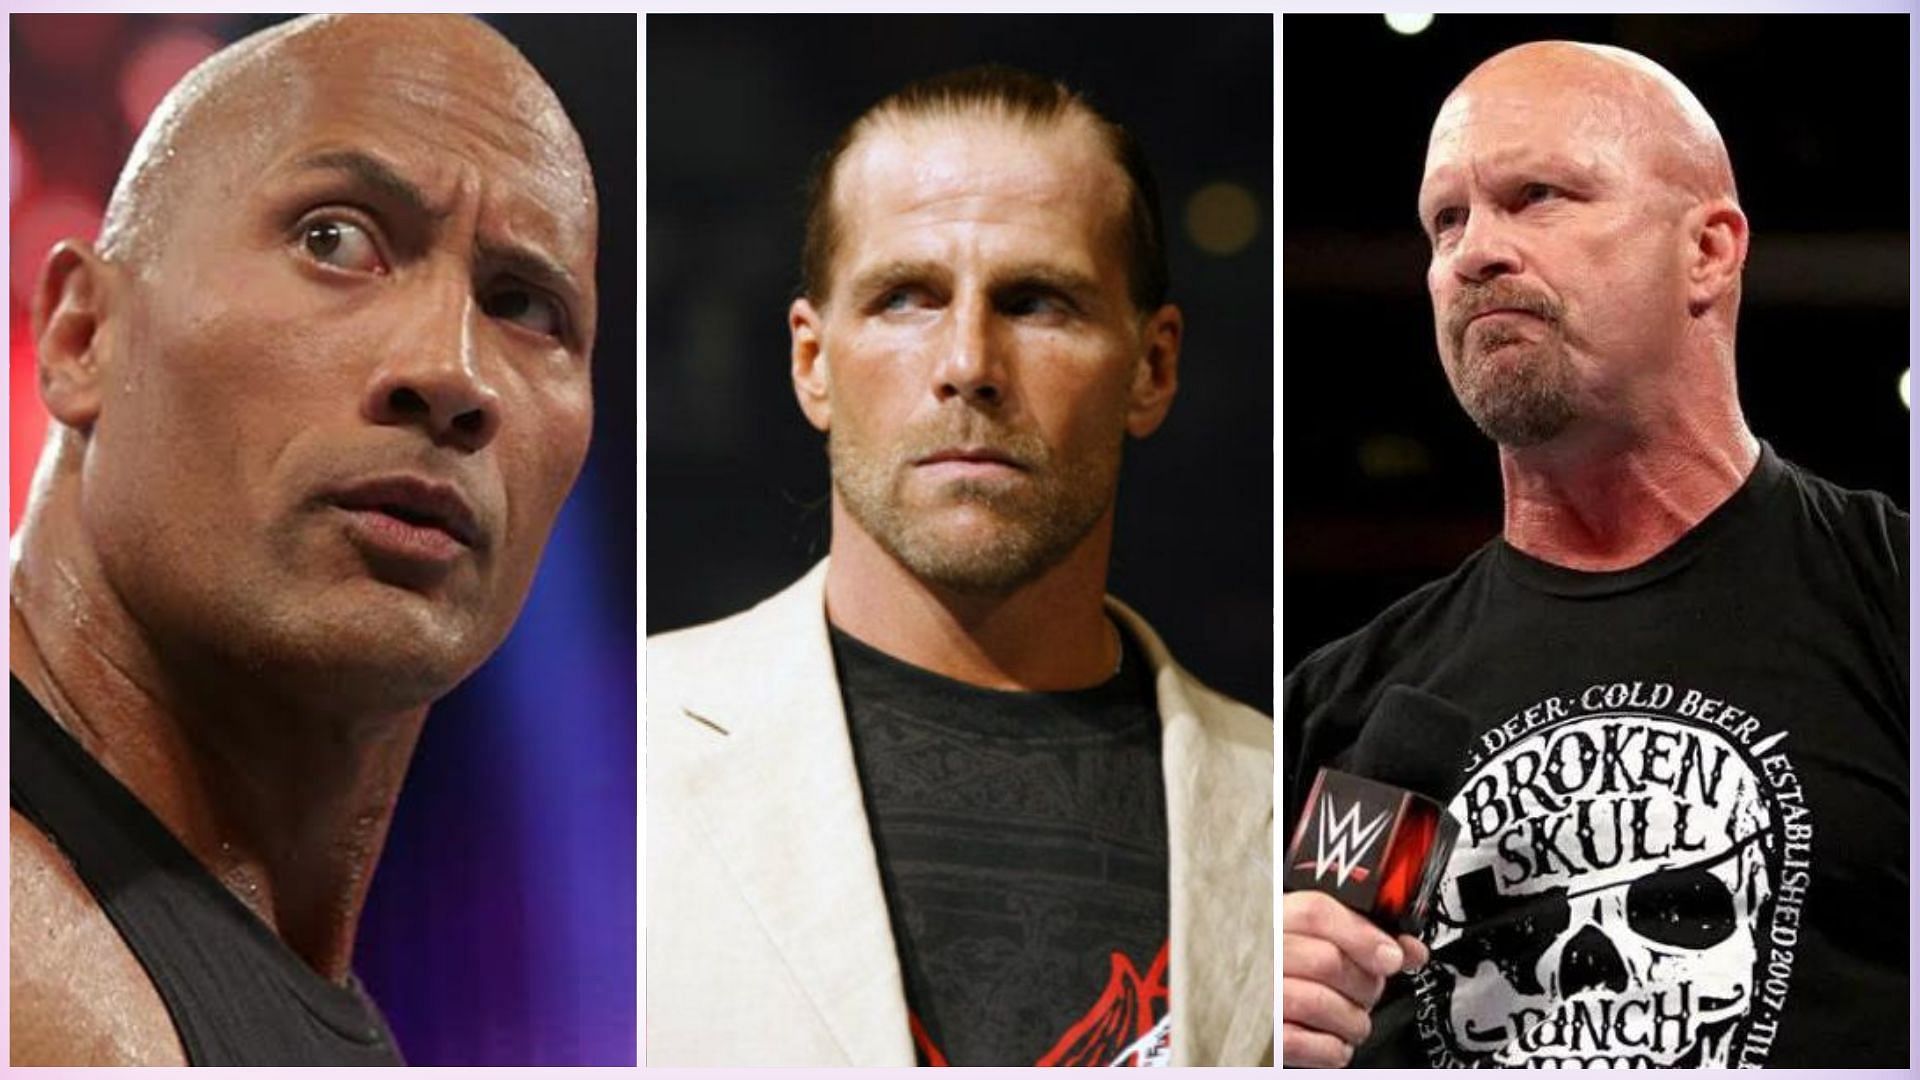 The Rock on the left, Shawn Michaels in the middle, Steve Austin on the right